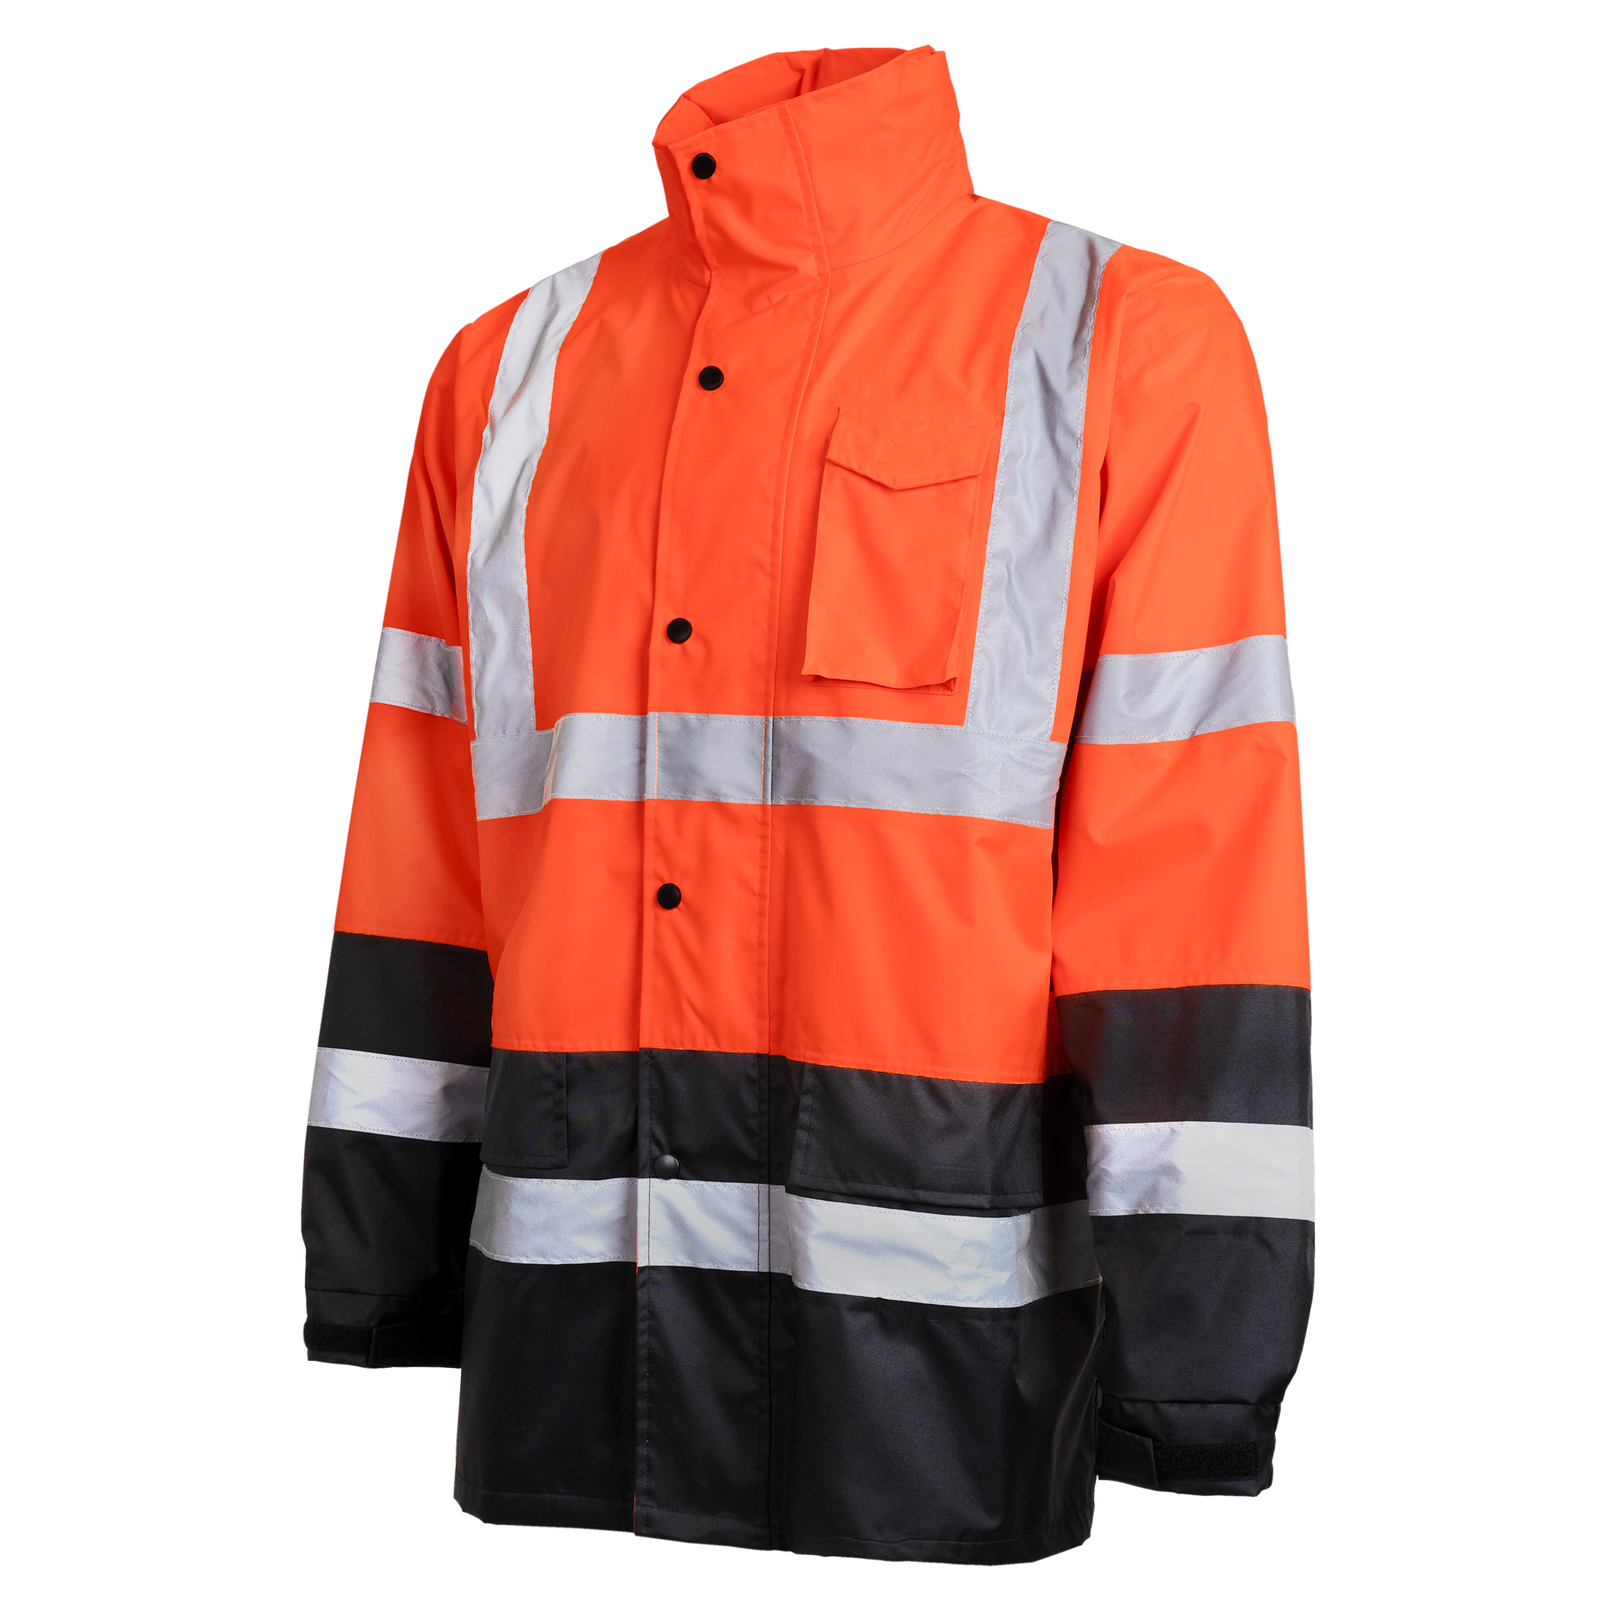 Diagonal view of a JORESTECH High visibility yellow and black rain jacket with 2 inches reflective strips and hideaway hoddie